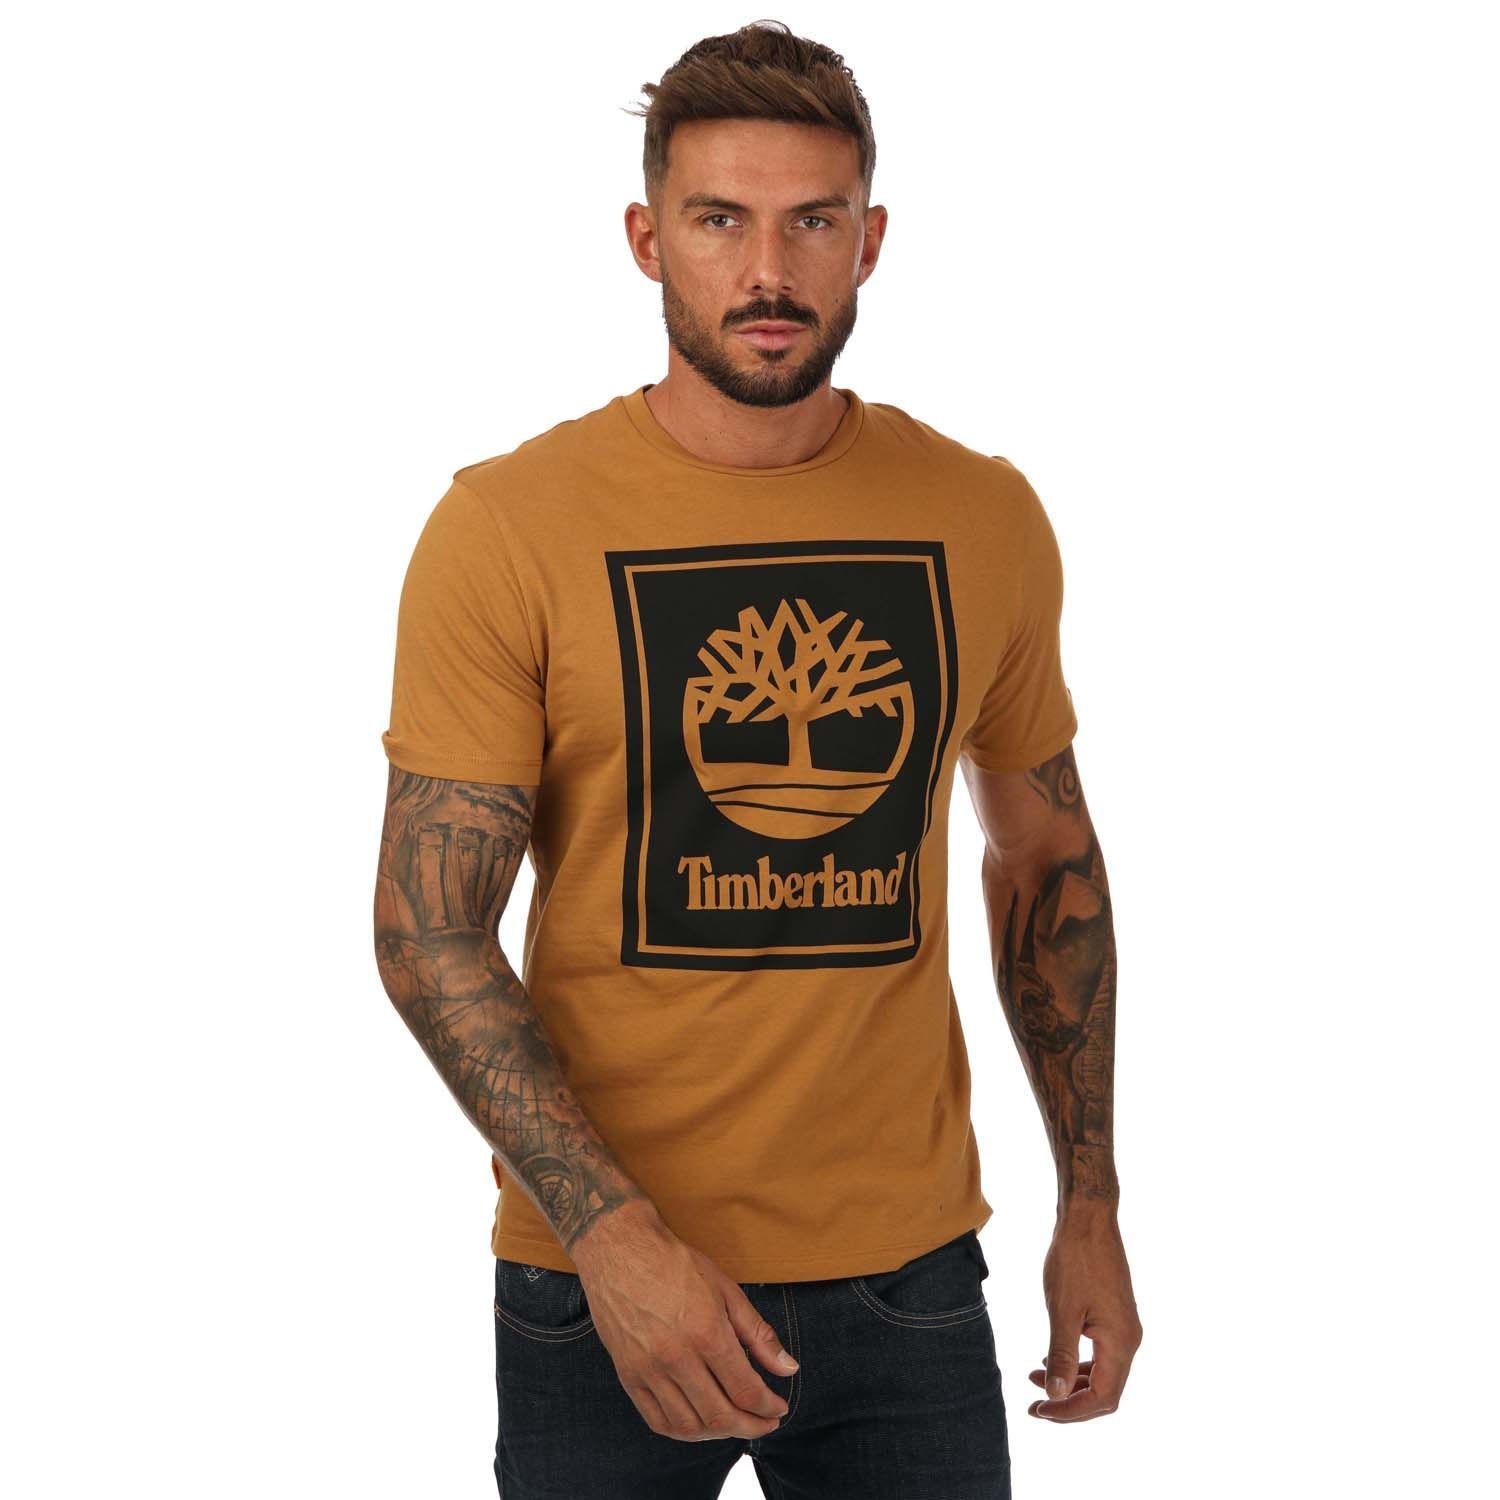 Mens Timberland Stack T- Shirt in wheat.- Ribbed crew neckline.- Short sleeves.- Logo print to chest.- Regular fit.- 100% Cotton. - Ref: A2AJ1P57